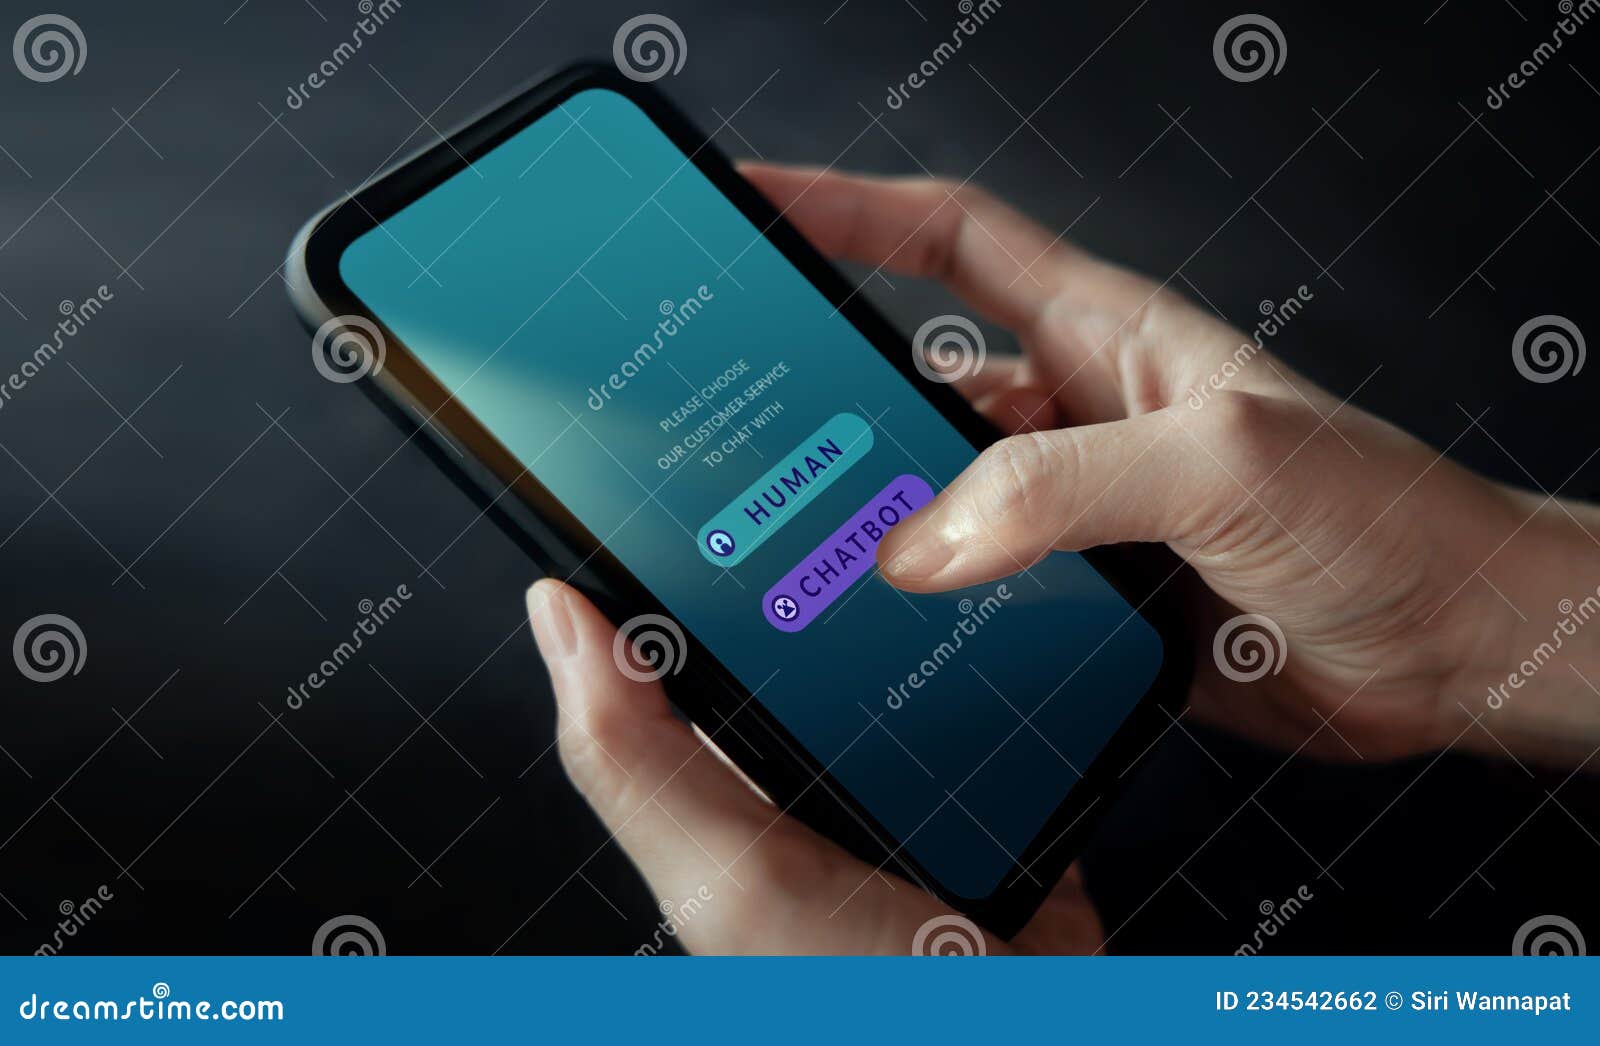 chatbot, livechat technology concept. customer using mobile phone to make conversation with an artificial intelligence service.